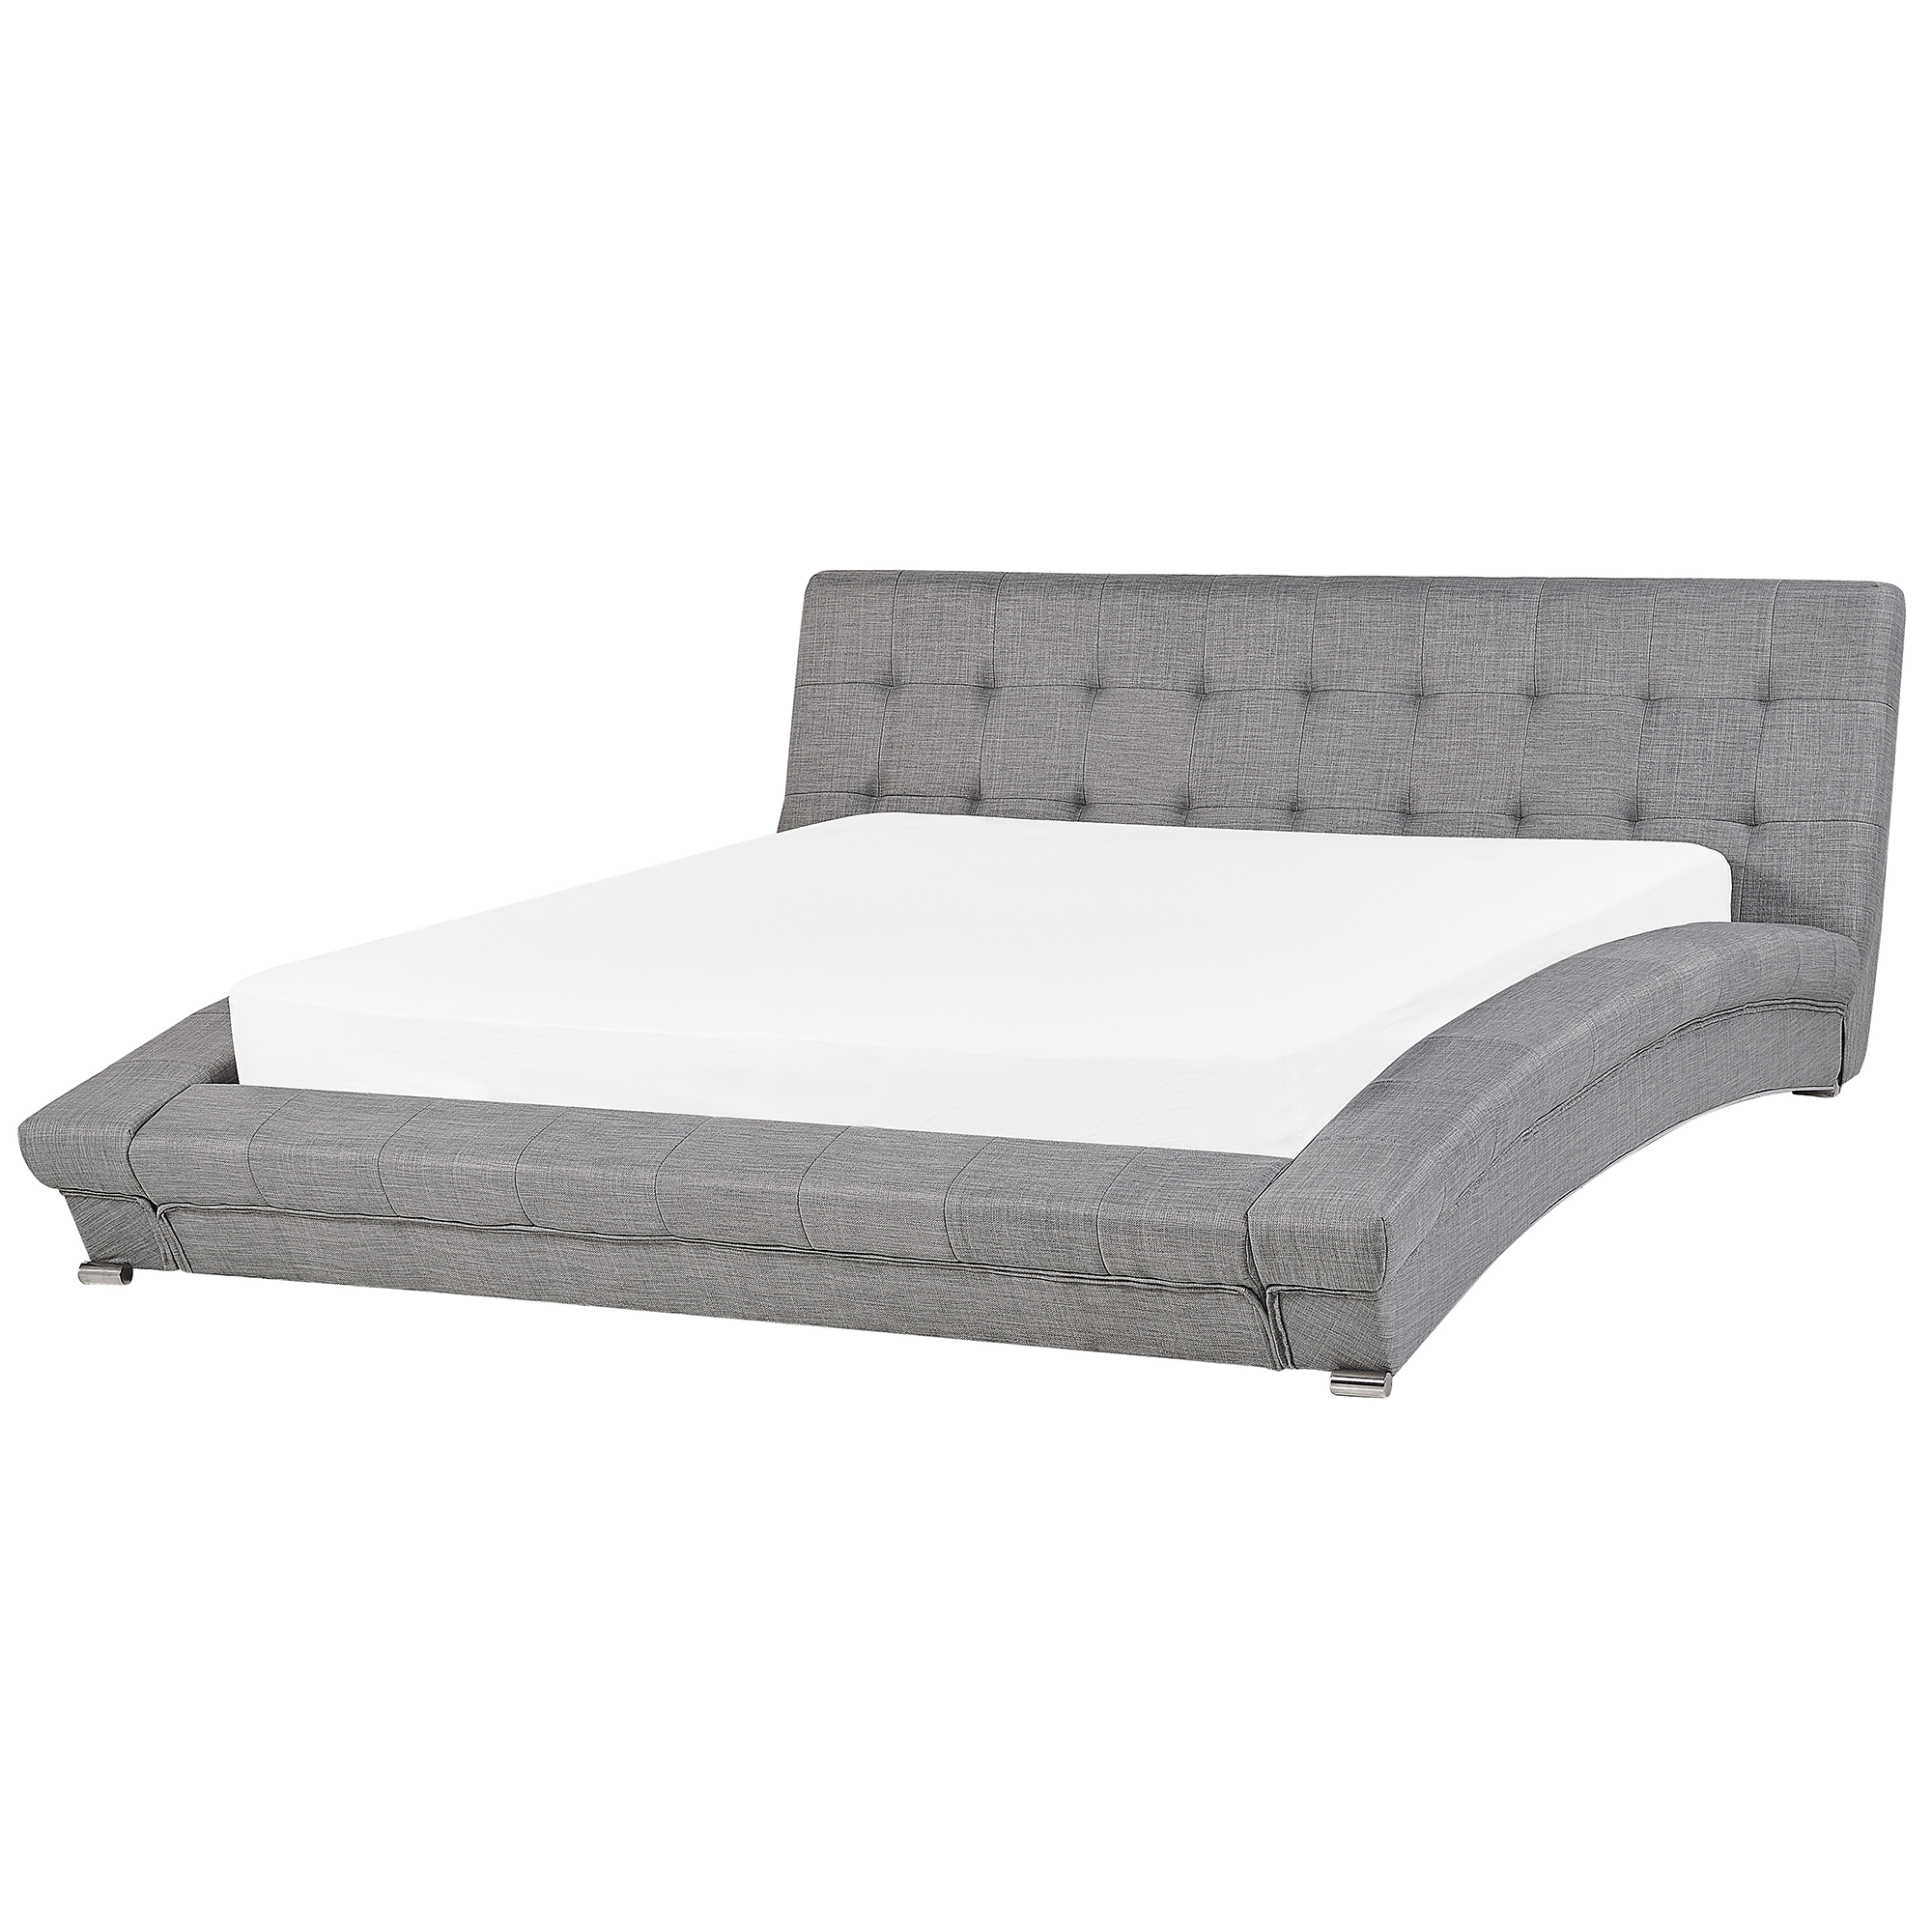 Beliani Waterbed Grey Fabric EU Super King Size 6ft Arched Frame Tufted Headboard